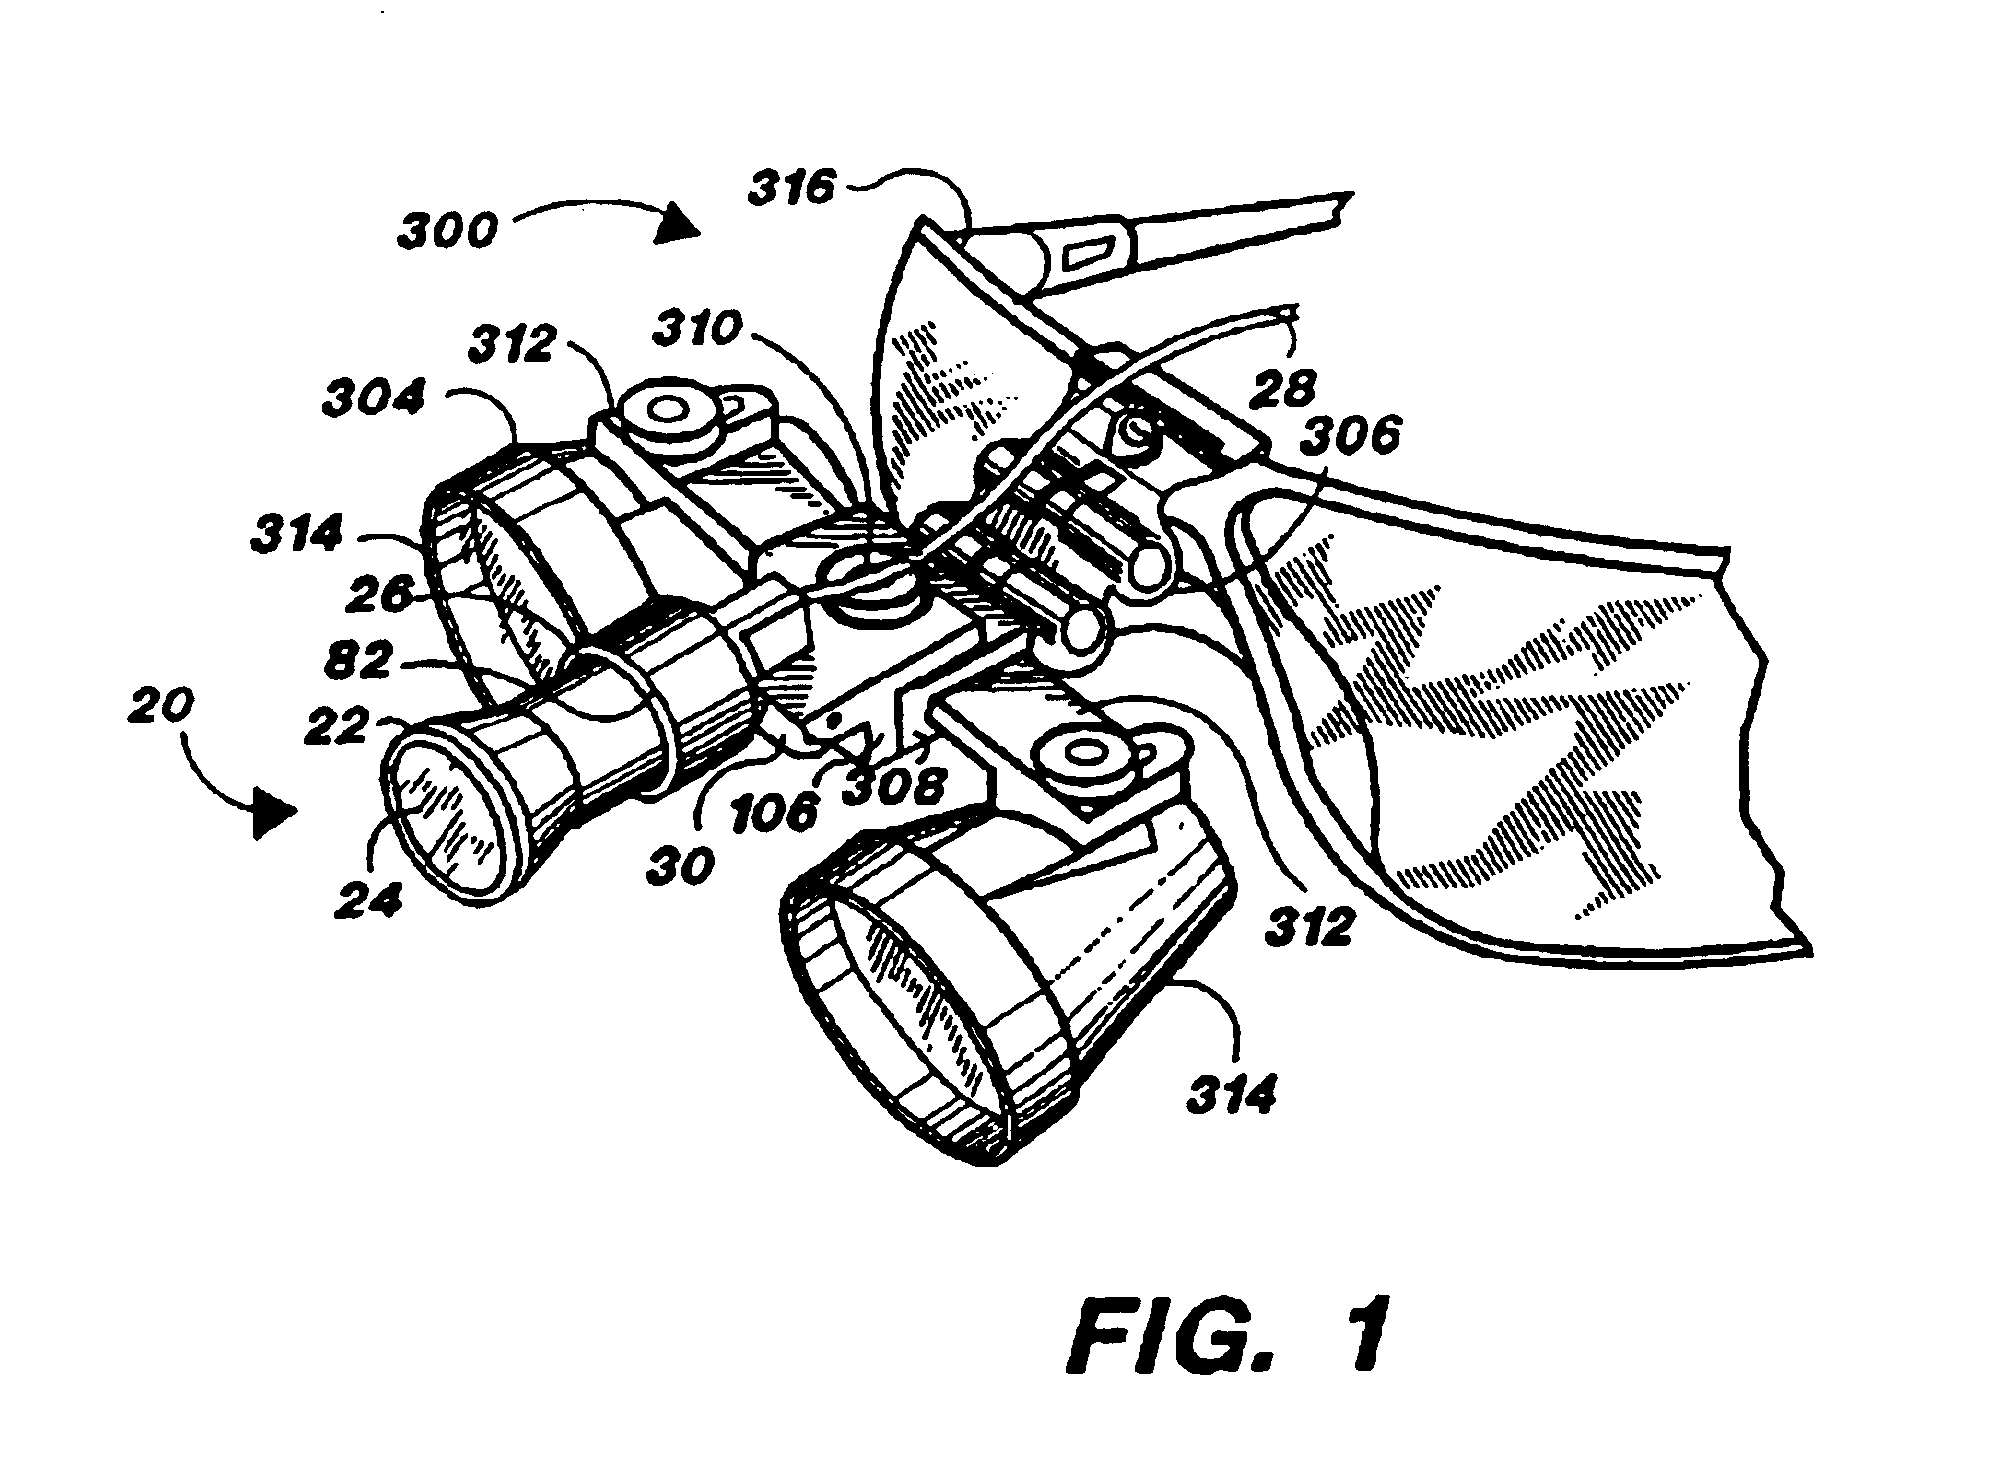 Illumination assembly for dental and medical applications